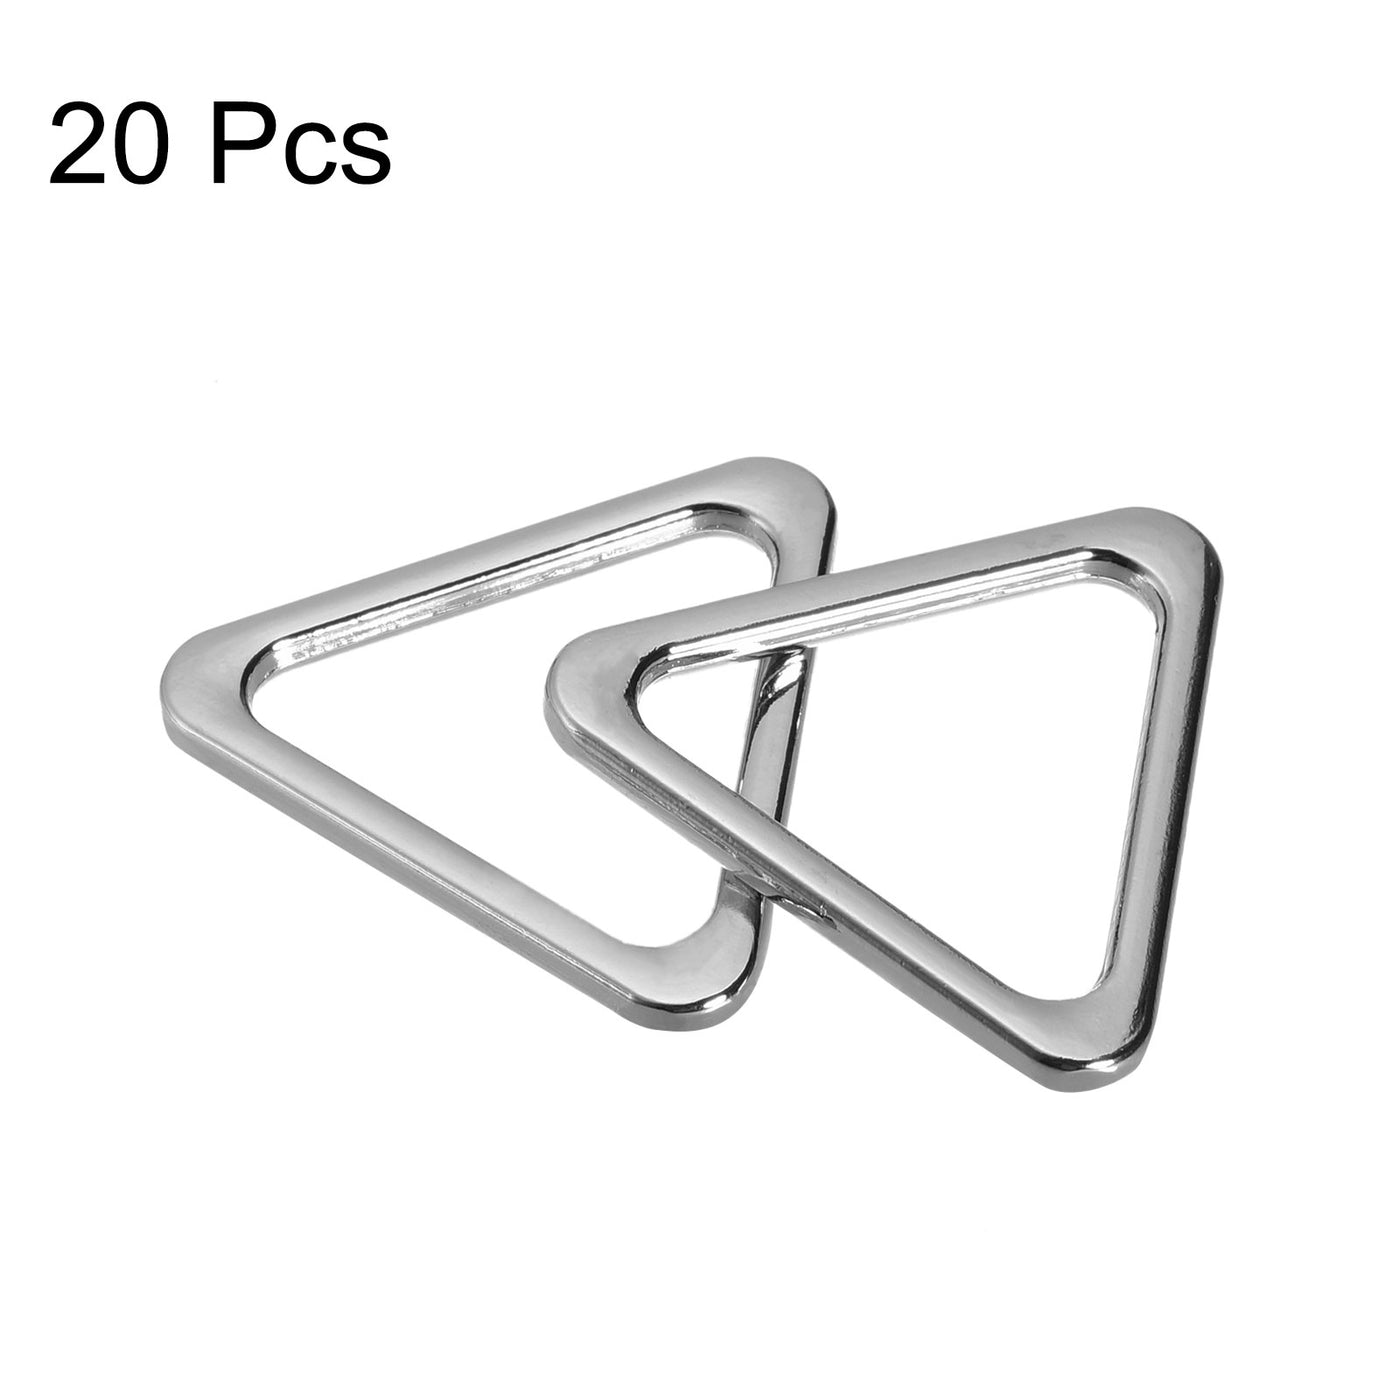 Uxcell Uxcell Metal Triangle Ring Buckle 30mm(1.18") Inner Width for DIY Foggy Silver 20pcs